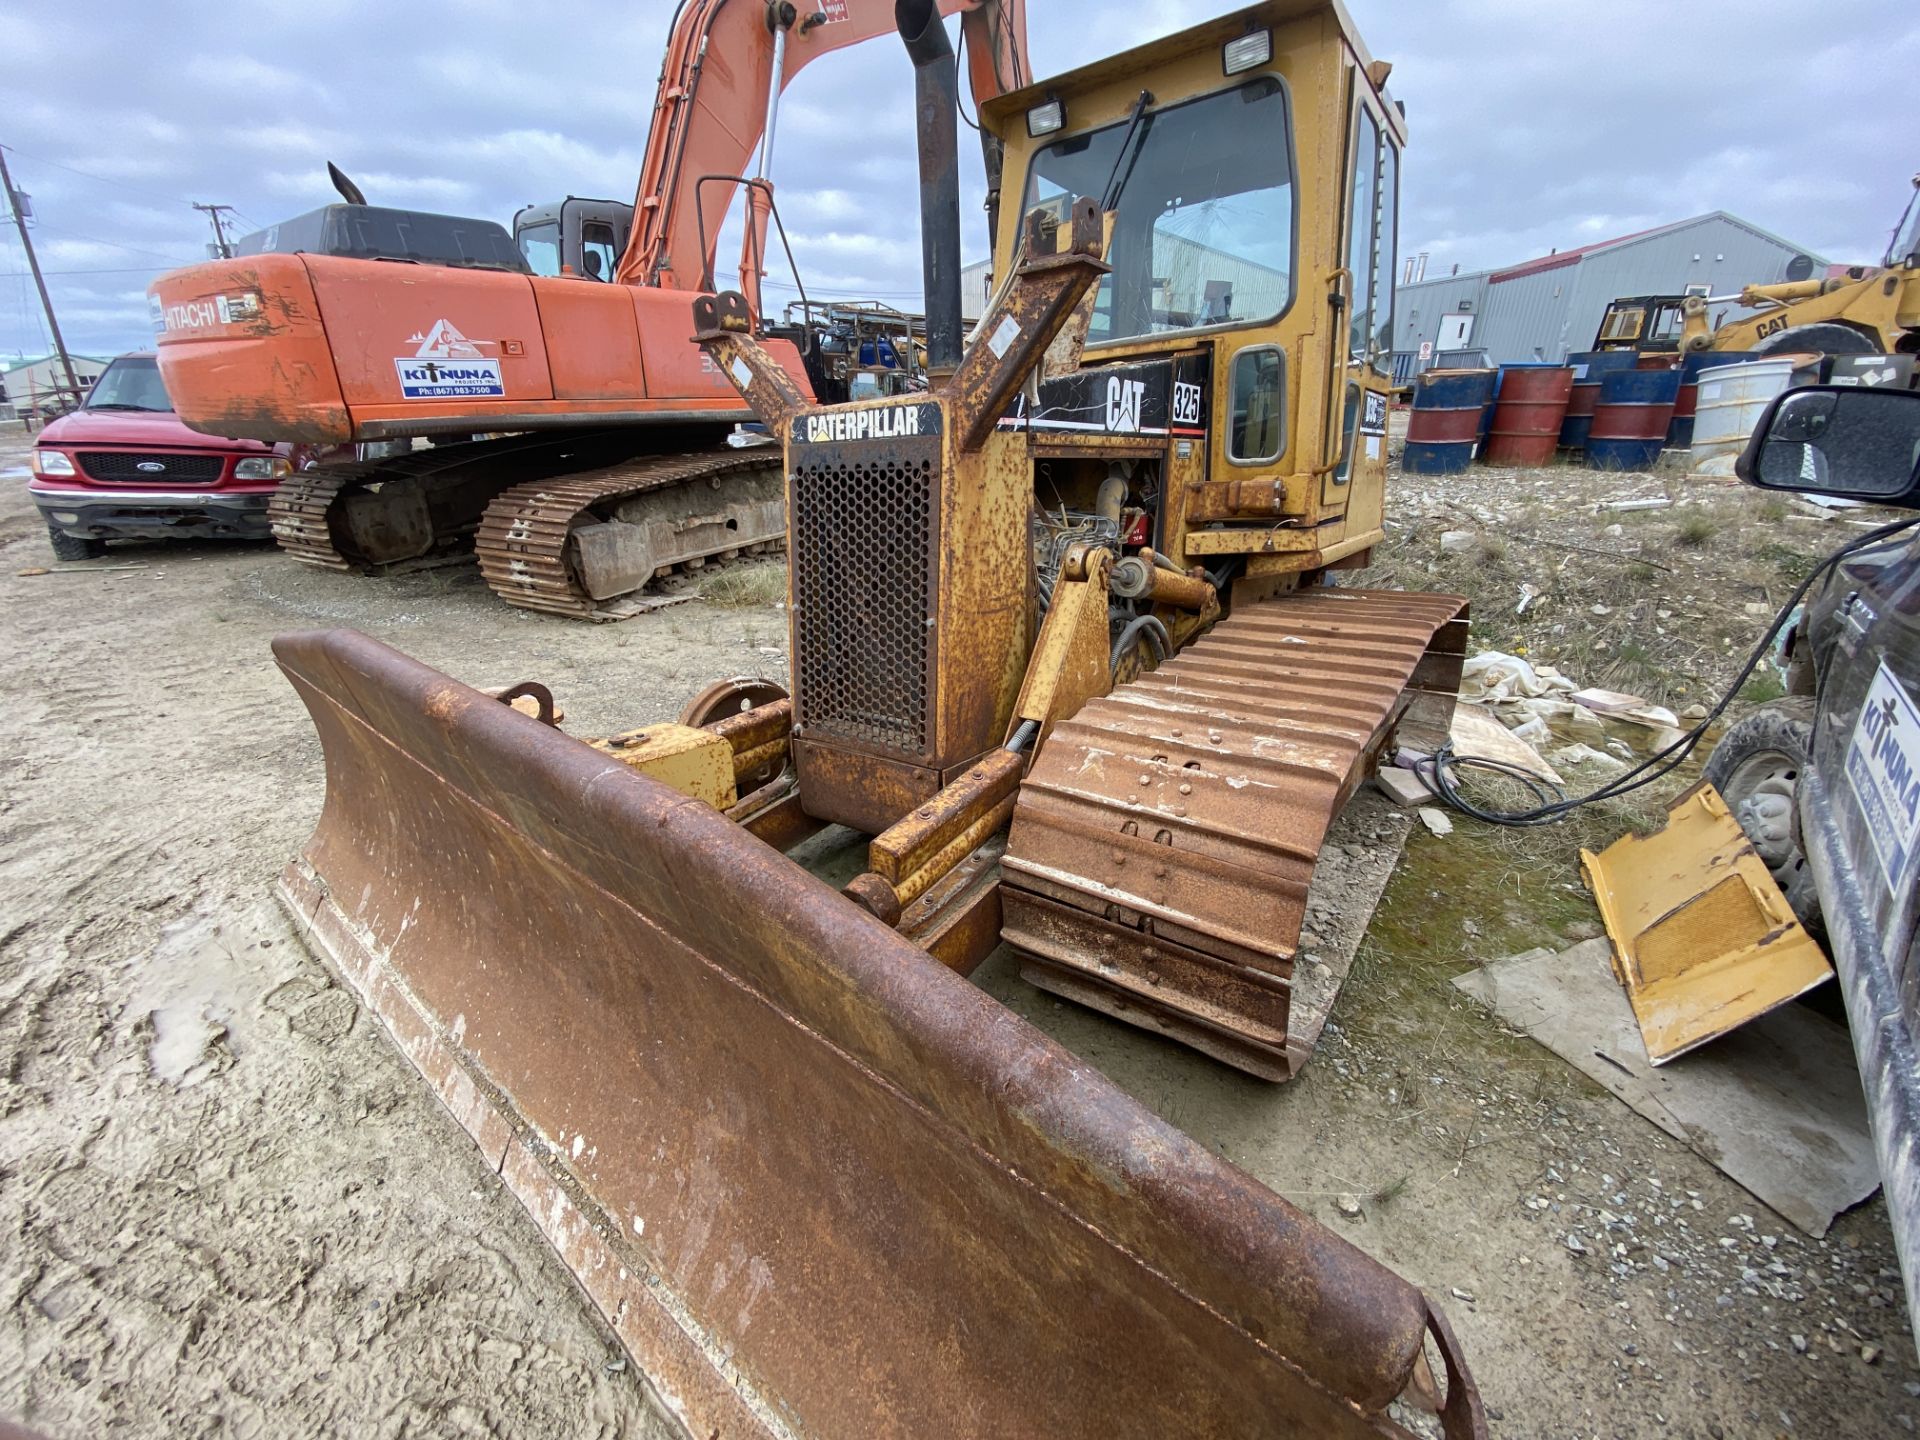 CATERPILLAR DC3 CRAWLER DOZER TRACK REPAIR REQUIRED, 6 WAY BLADE, 7029 HRS. S/N 5XK07145 -M TRACK IN